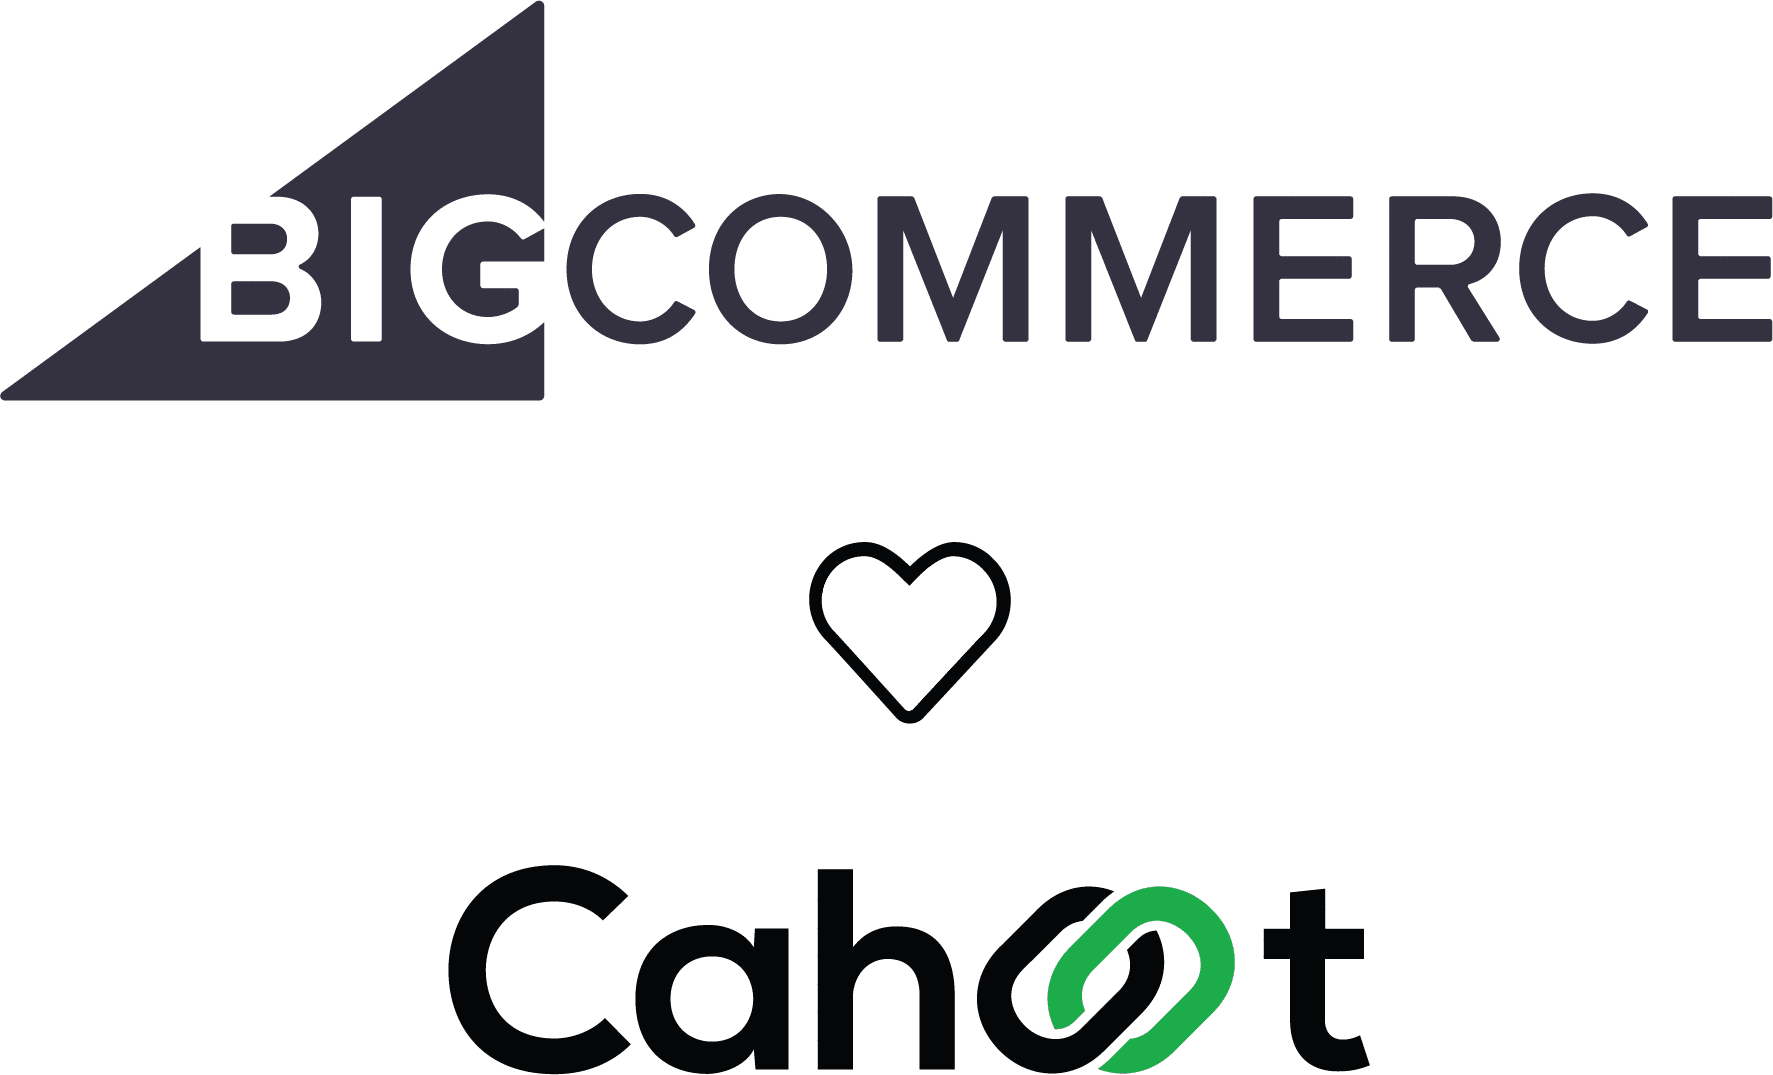 Cahoot’s BigCommerce fulfillment services help you offer free shipping on your BigCommerce store